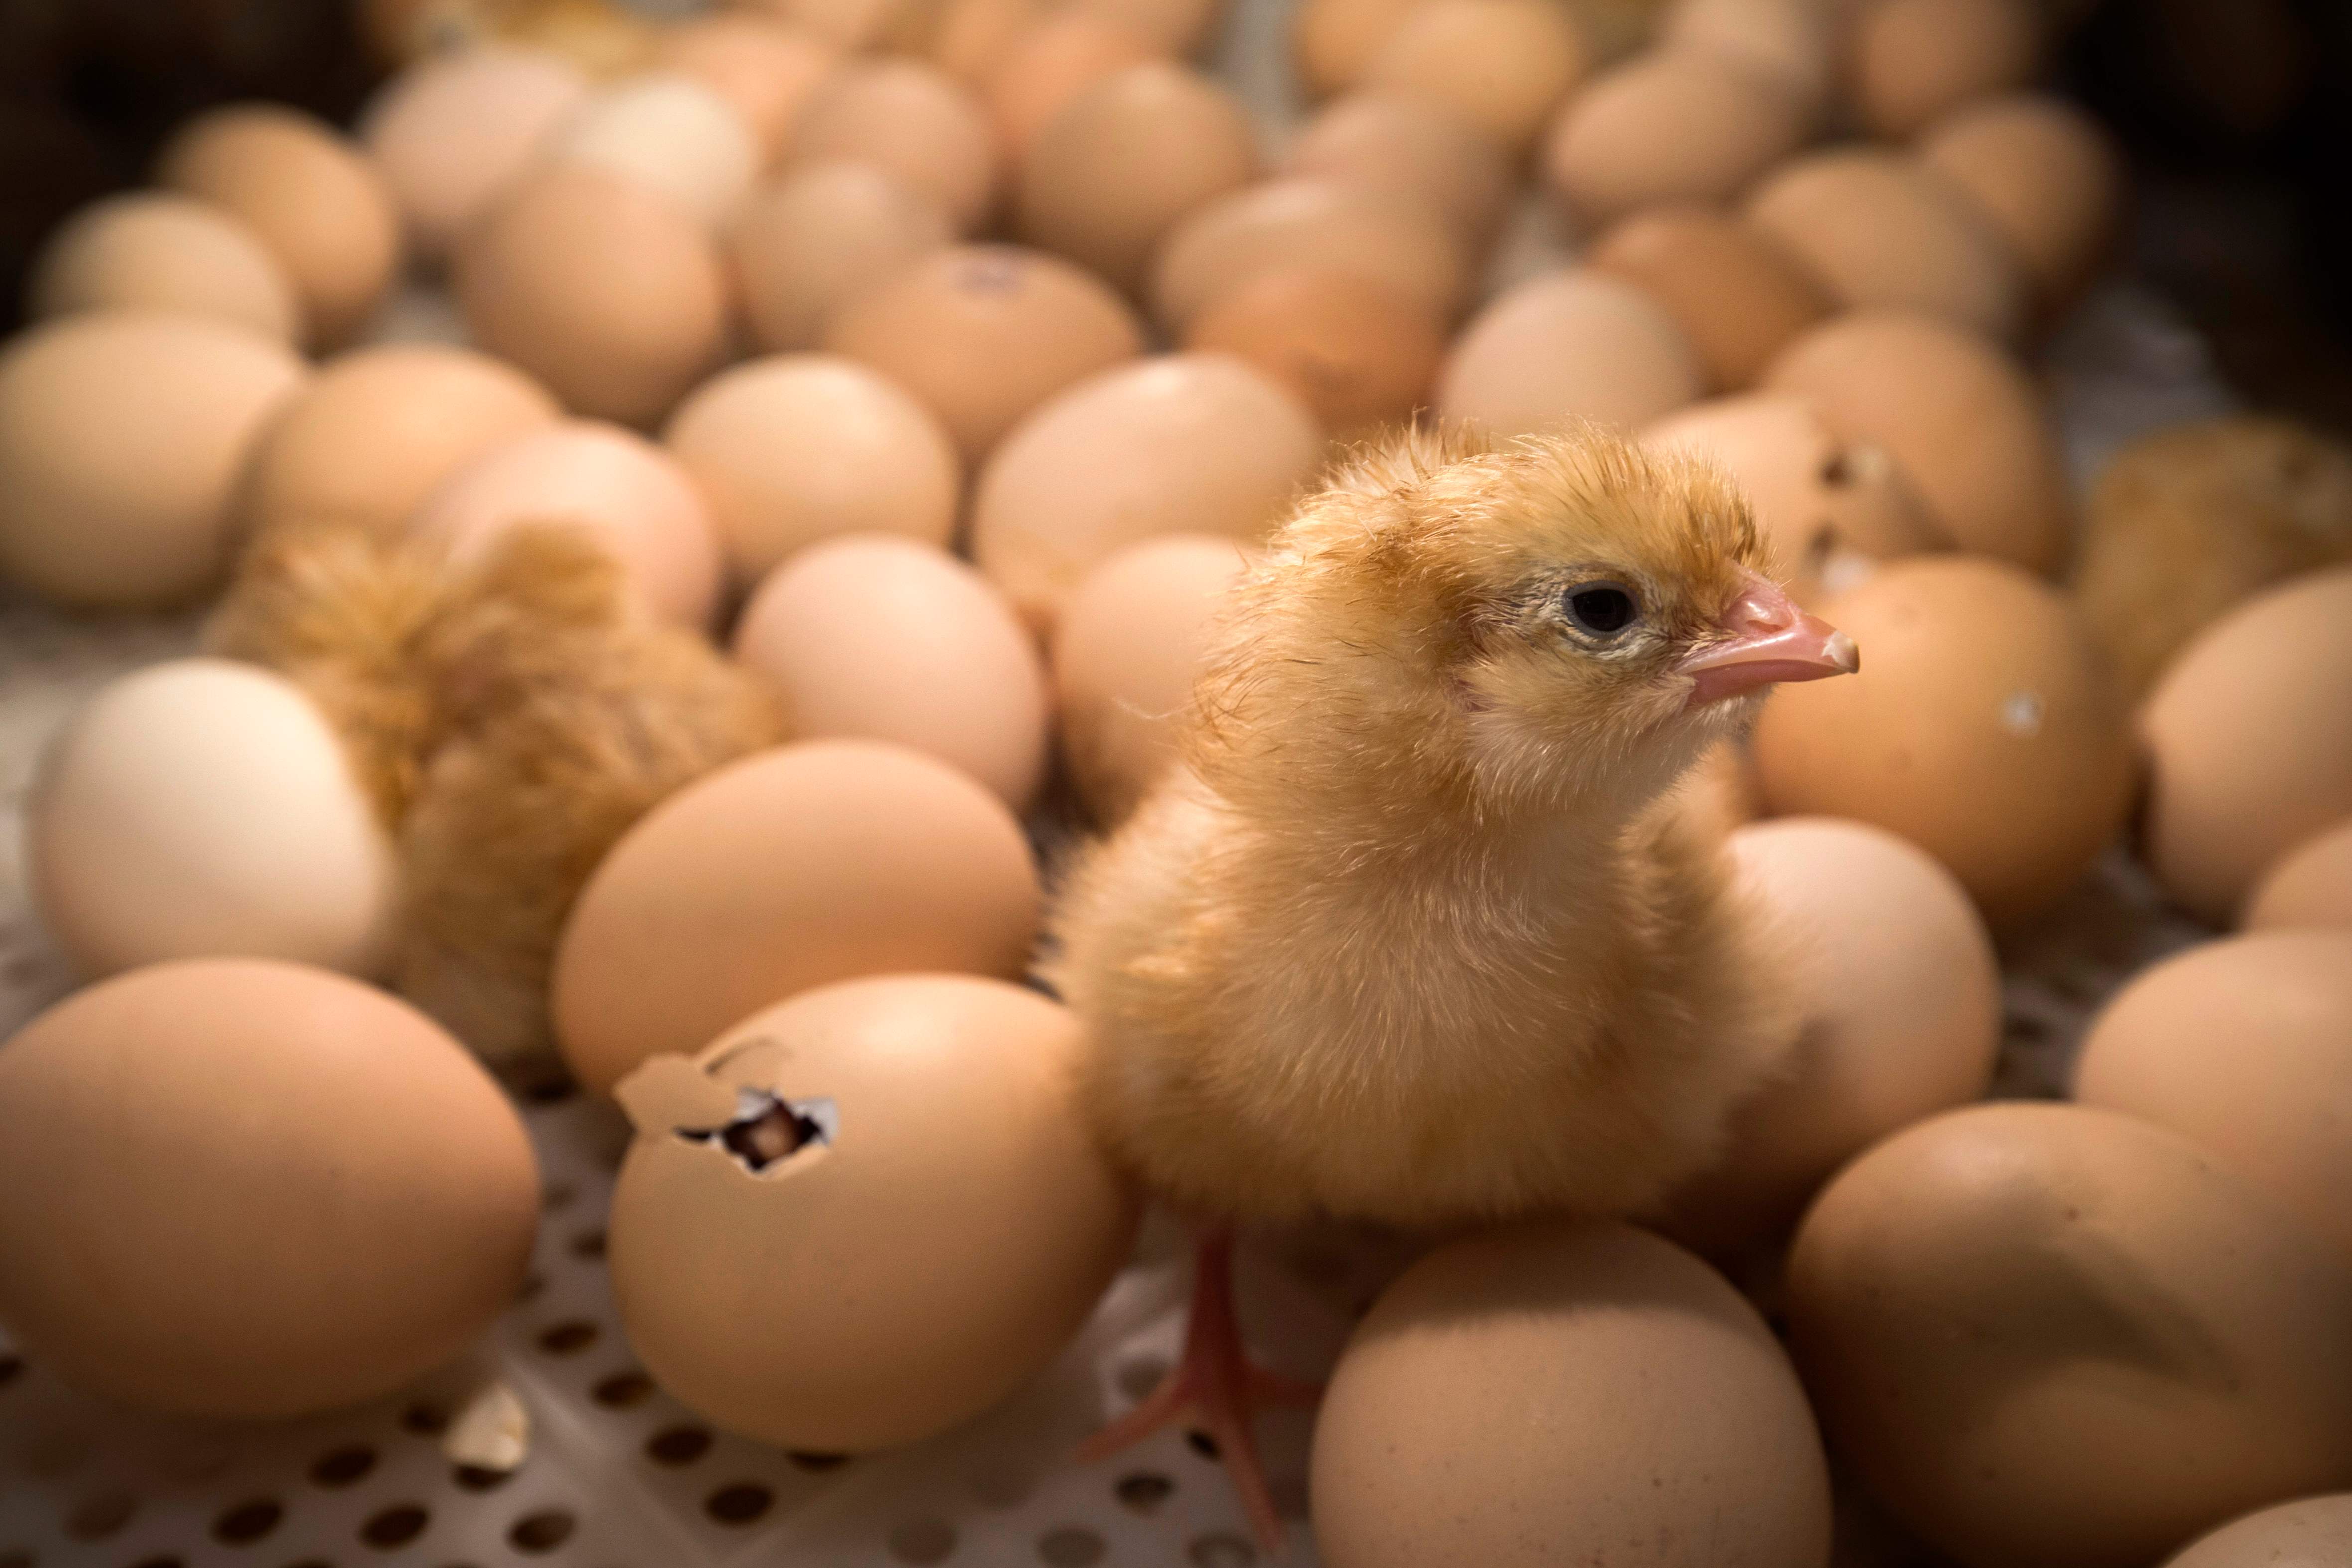 (FILES) In this file photo taken on February 26, 2017 a chick stands among eggs being hatched inside an incubator at the Agriculture Fair in Paris. - Germany's highest court on June 13, 2019 ruled that the killing of male chicks is only allowed during a transitional period until farms will be able to operate with new proceedings for the determination of the sex of chicks. Usually male chicks are killed when laying hens are bred as the male animals of the breeds take too much time to develop meat. In France the Agriculture Ministry plans to announce "strong and clear" measures this year on animals well-being, including the killing of male chicks. (Photo by JOEL SAGET / AFP)